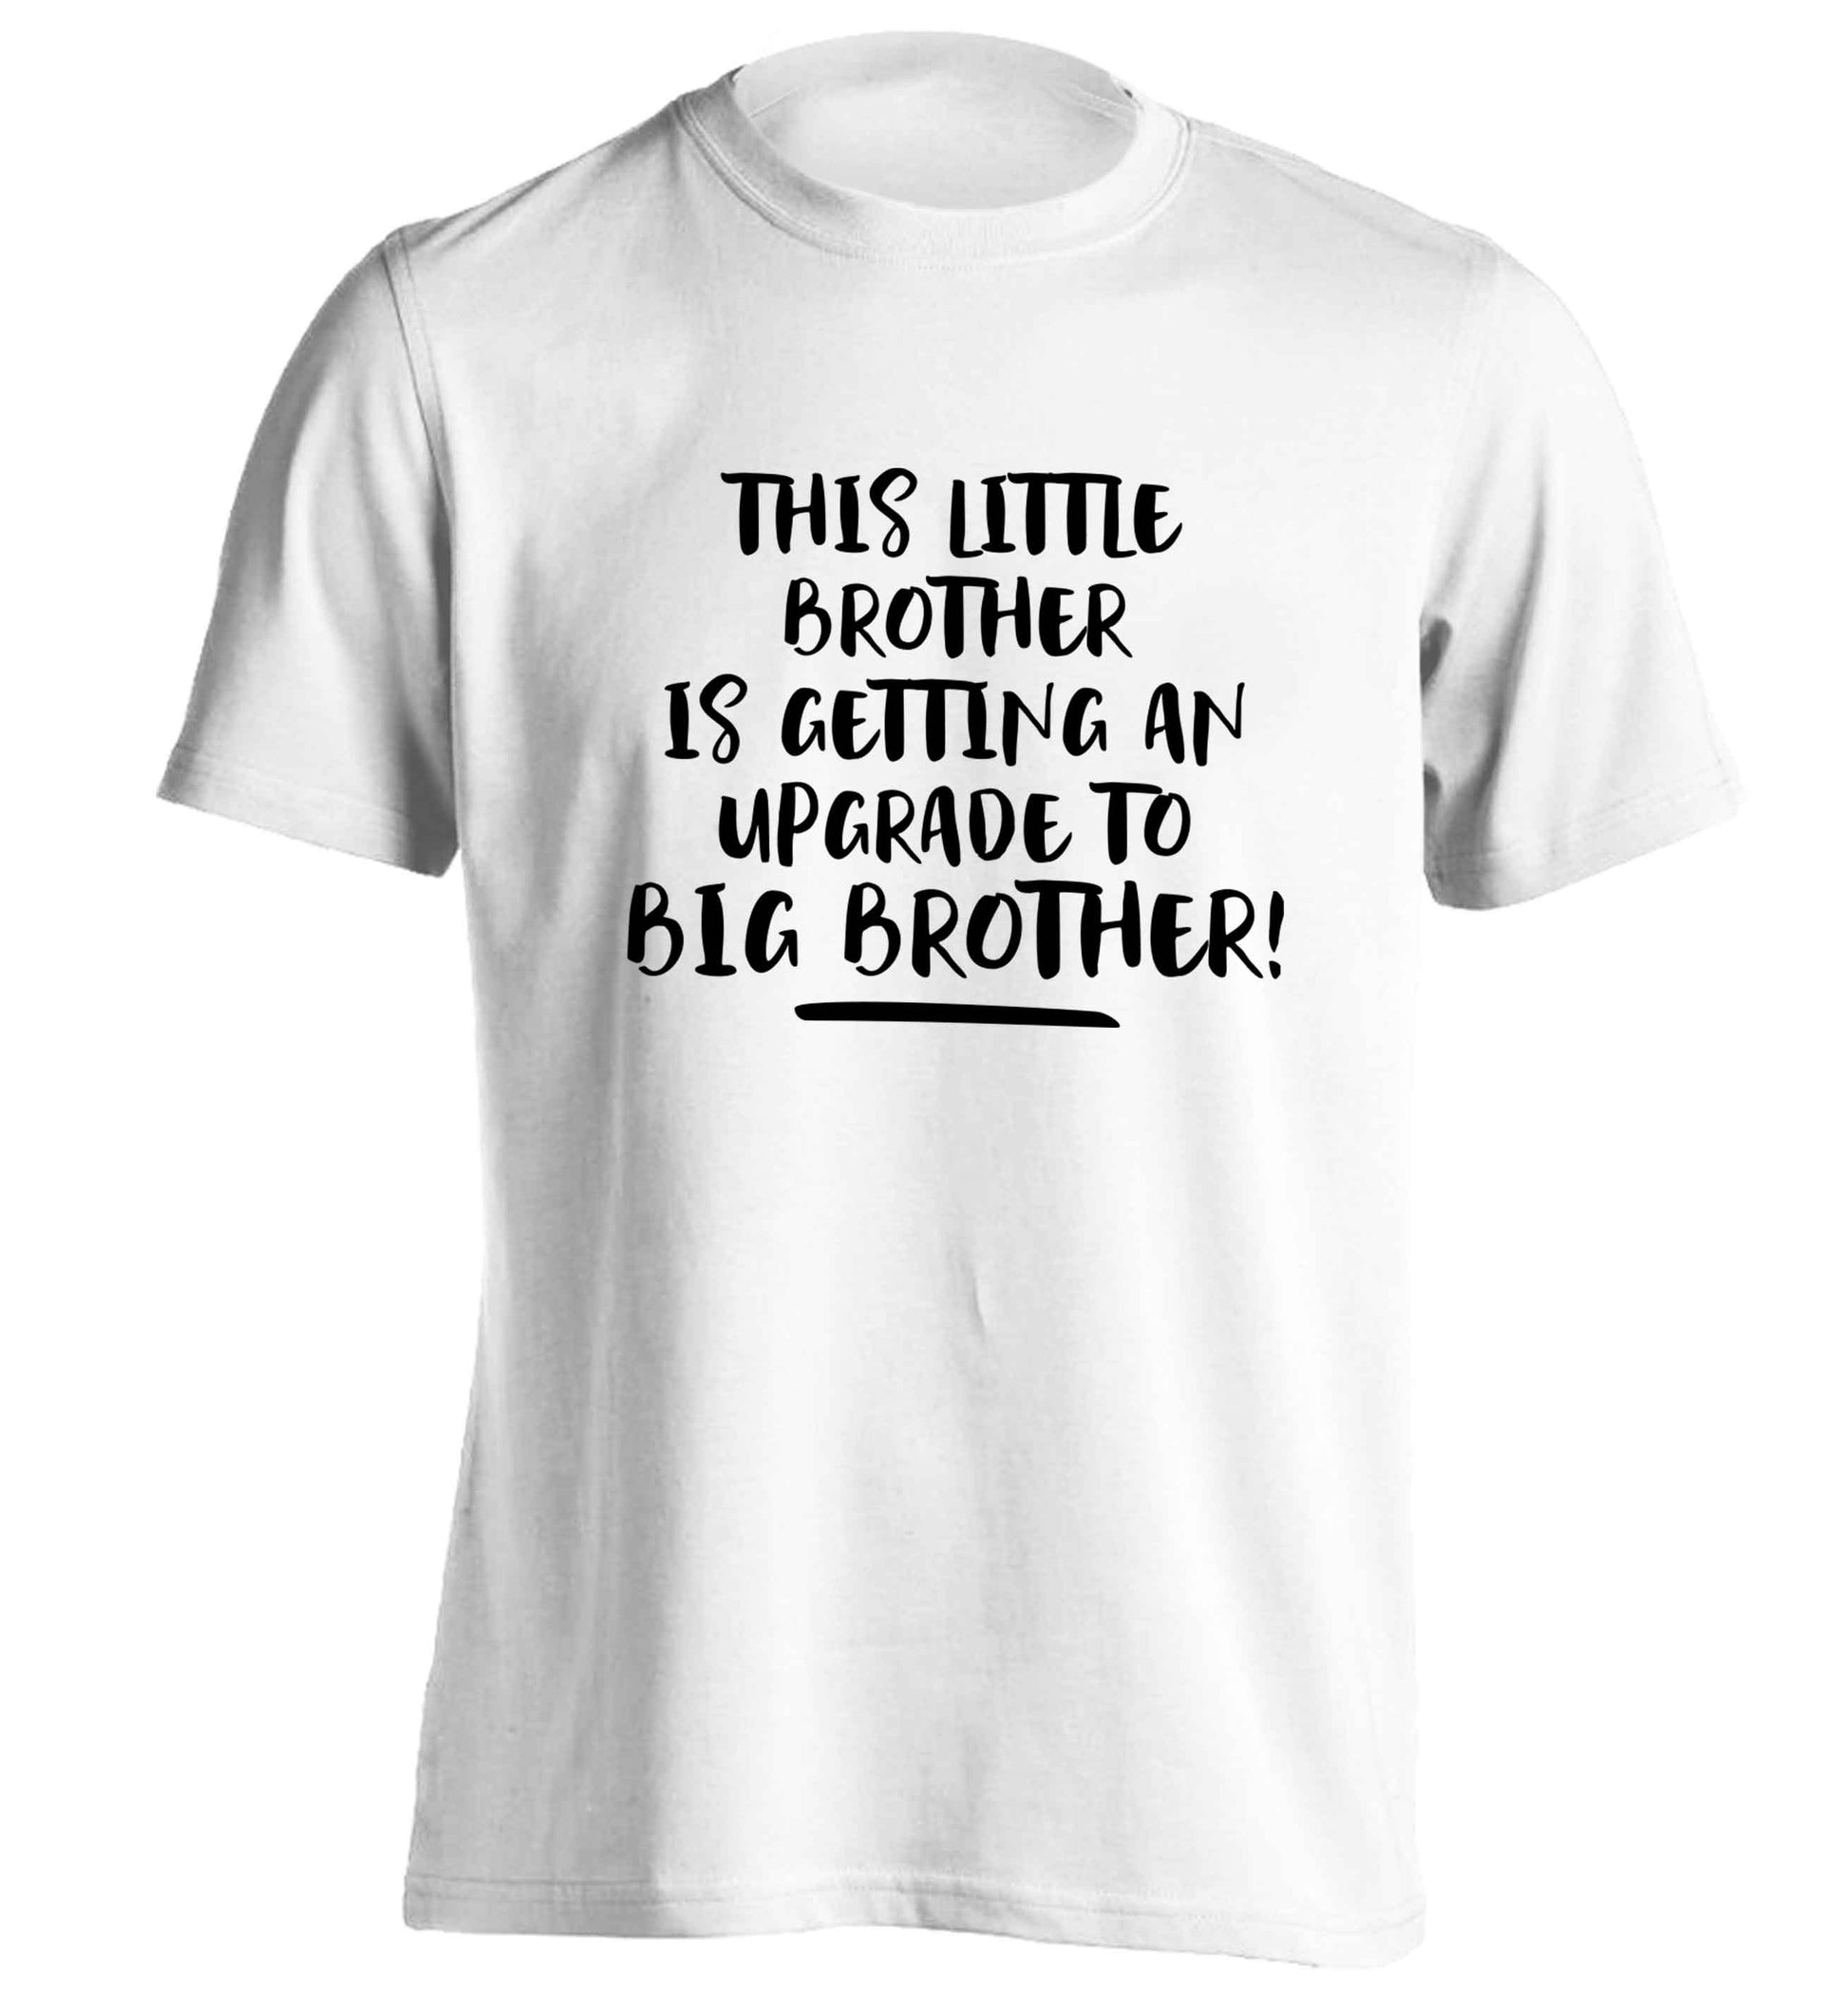 This little brother is getting an upgrade to big brother! adults unisex white Tshirt 2XL